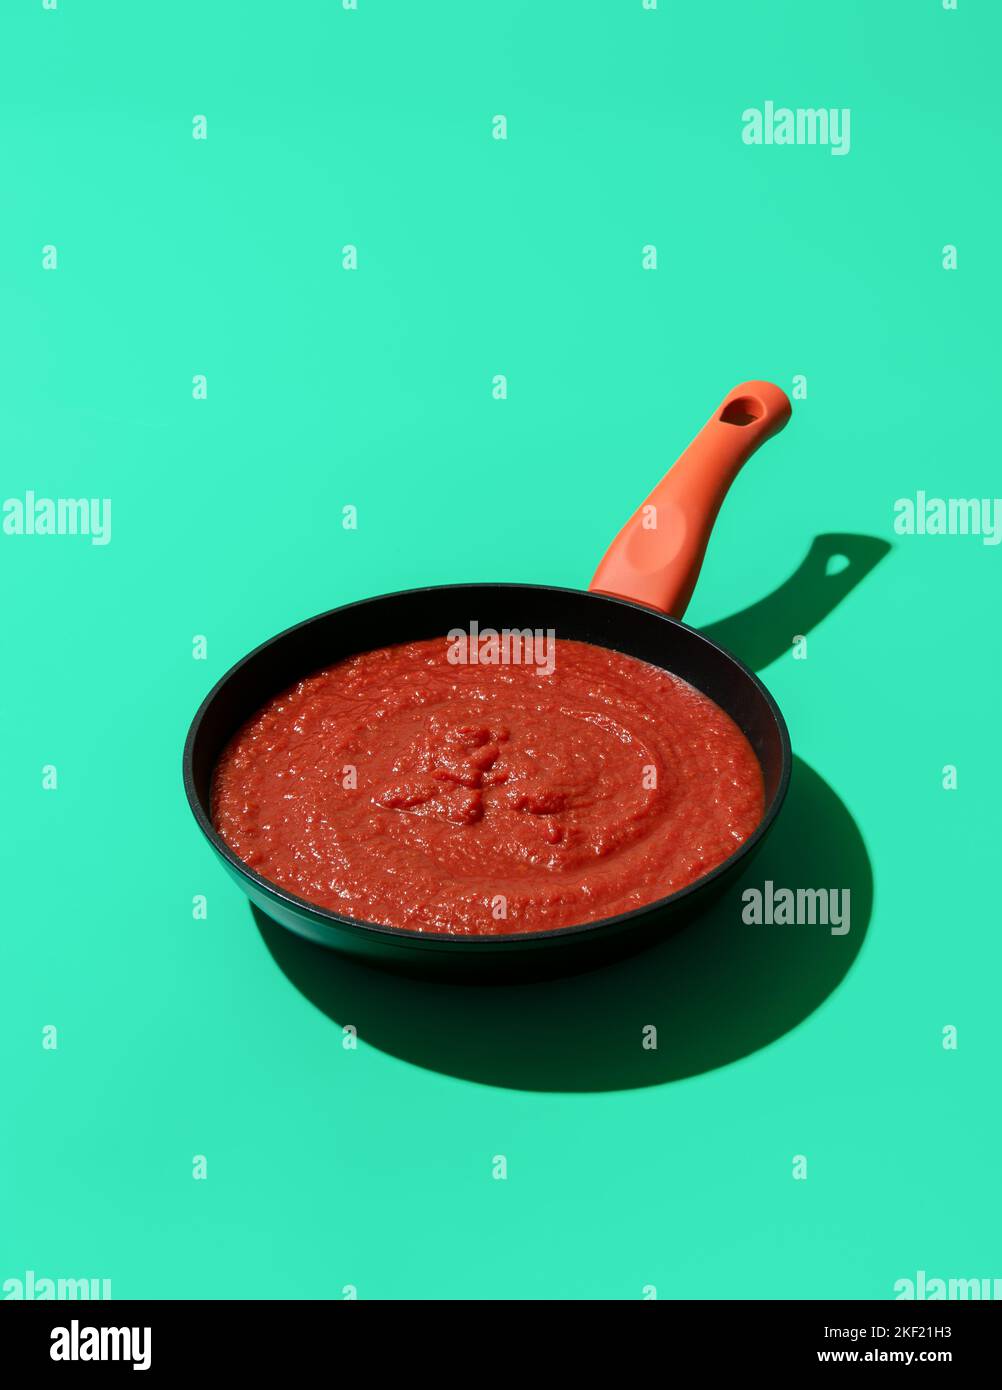 Iron cast pan with tomato sauce minimalist on a green colored table. Traditional italian tomato sauce with basil and garlic, used for pizza or pasta. Stock Photo